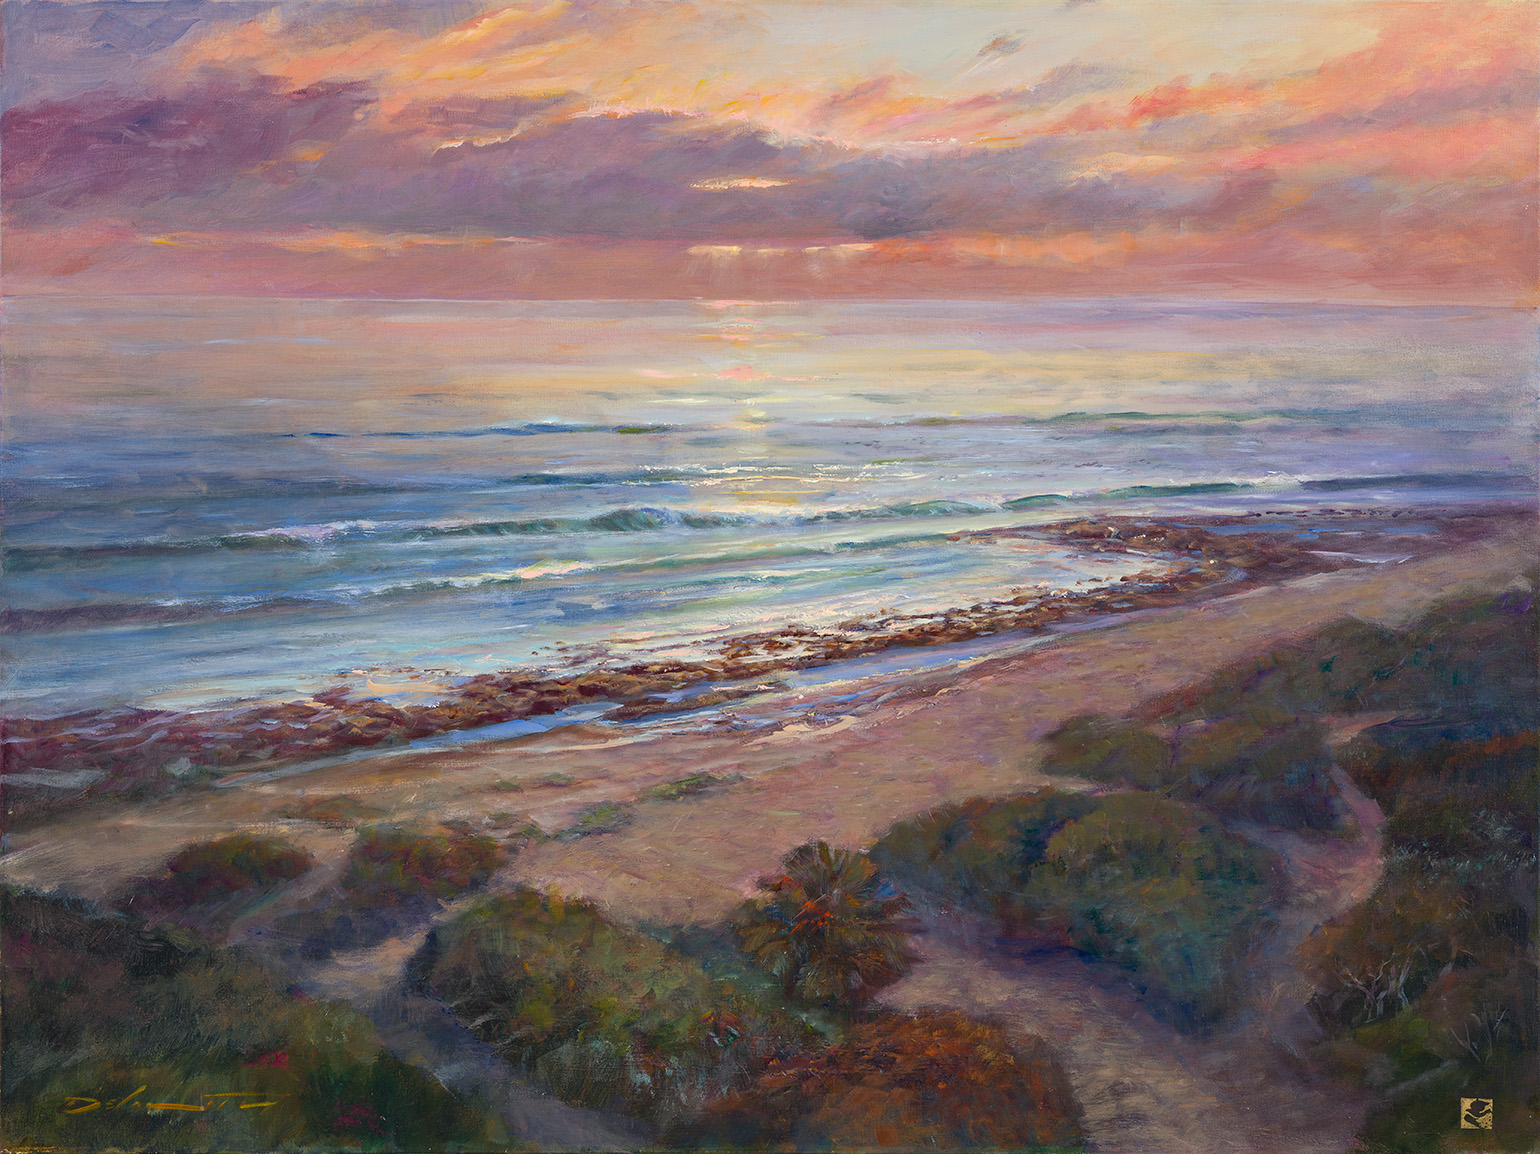 Rick Delanty, <em>From Afar, Trestles</em>, 2017, Oil over acrylic on panel, 30 x 40 in. UCI Institute and Museum of California Art, Gift from The Edward H. and Yvonne J. Boseker Collection © 2017, Rick J. Delanty, Delanty Fine Art